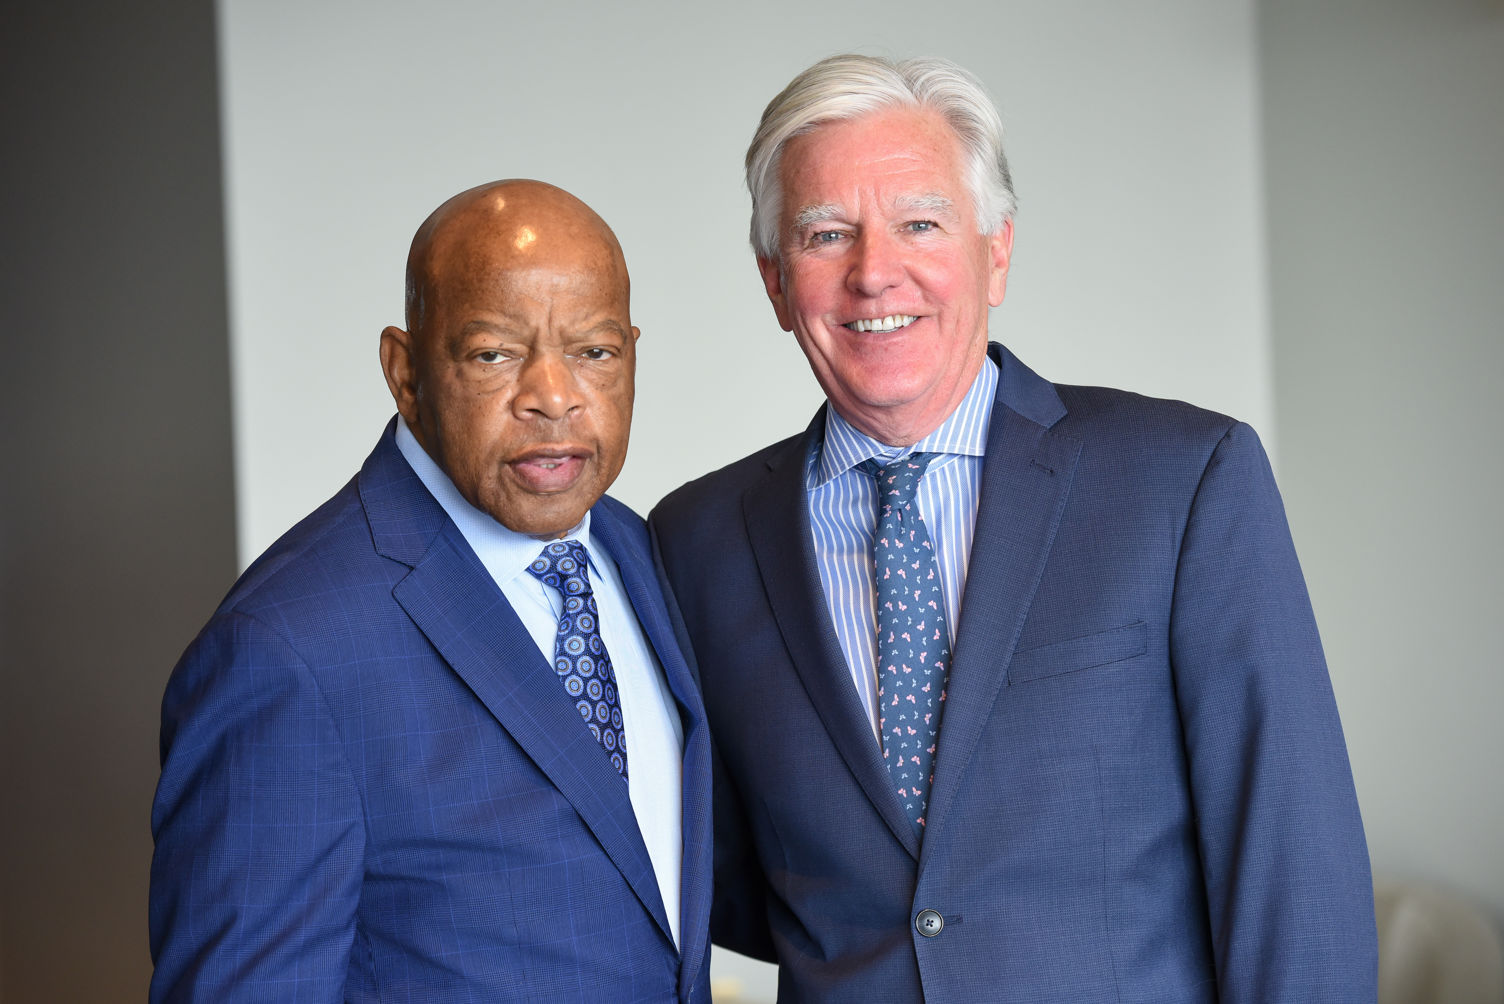 Congressman John Lewis and President Marty Meehan at an event at the UMass Club in 2018